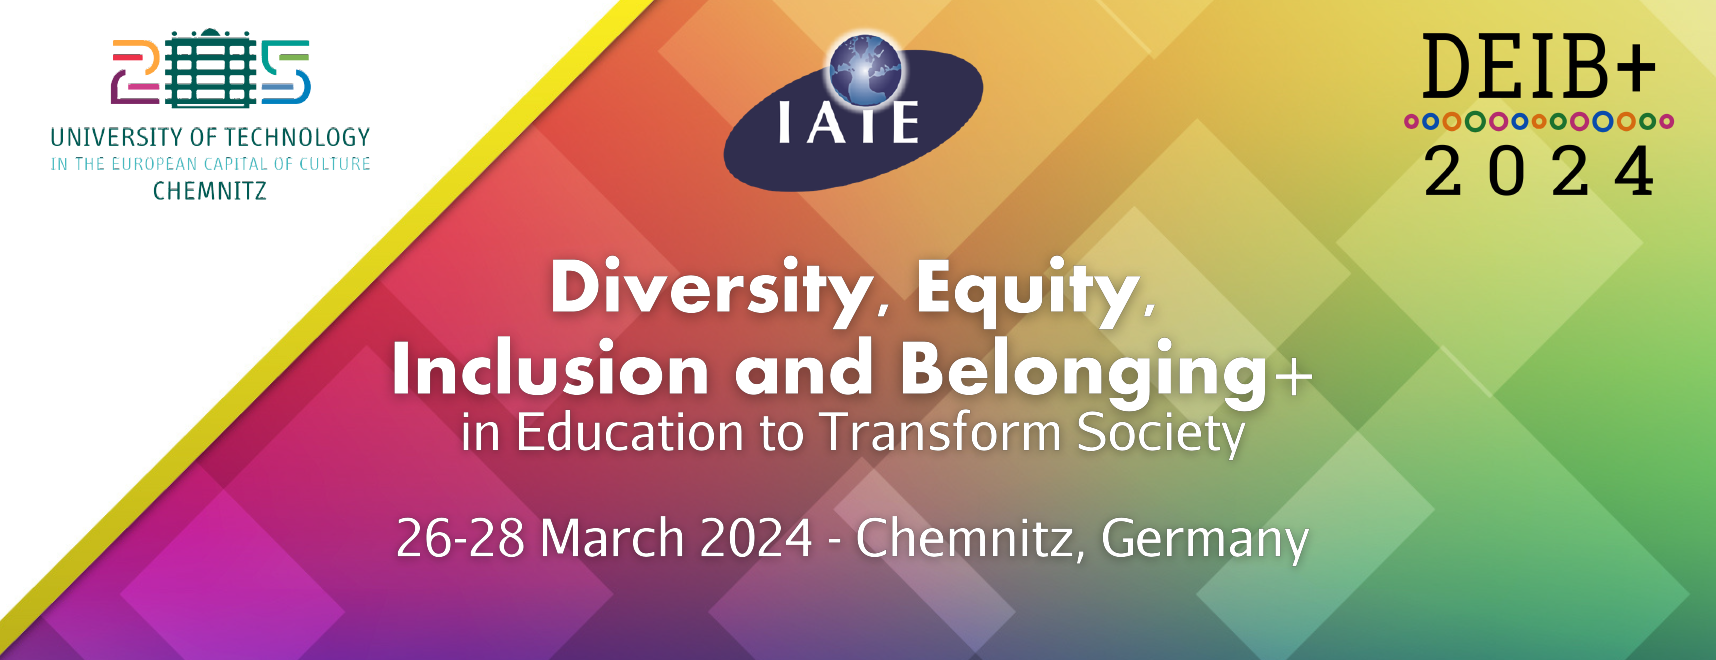 Diversity, Equity, Inclusion and Belonging (DEIB) 